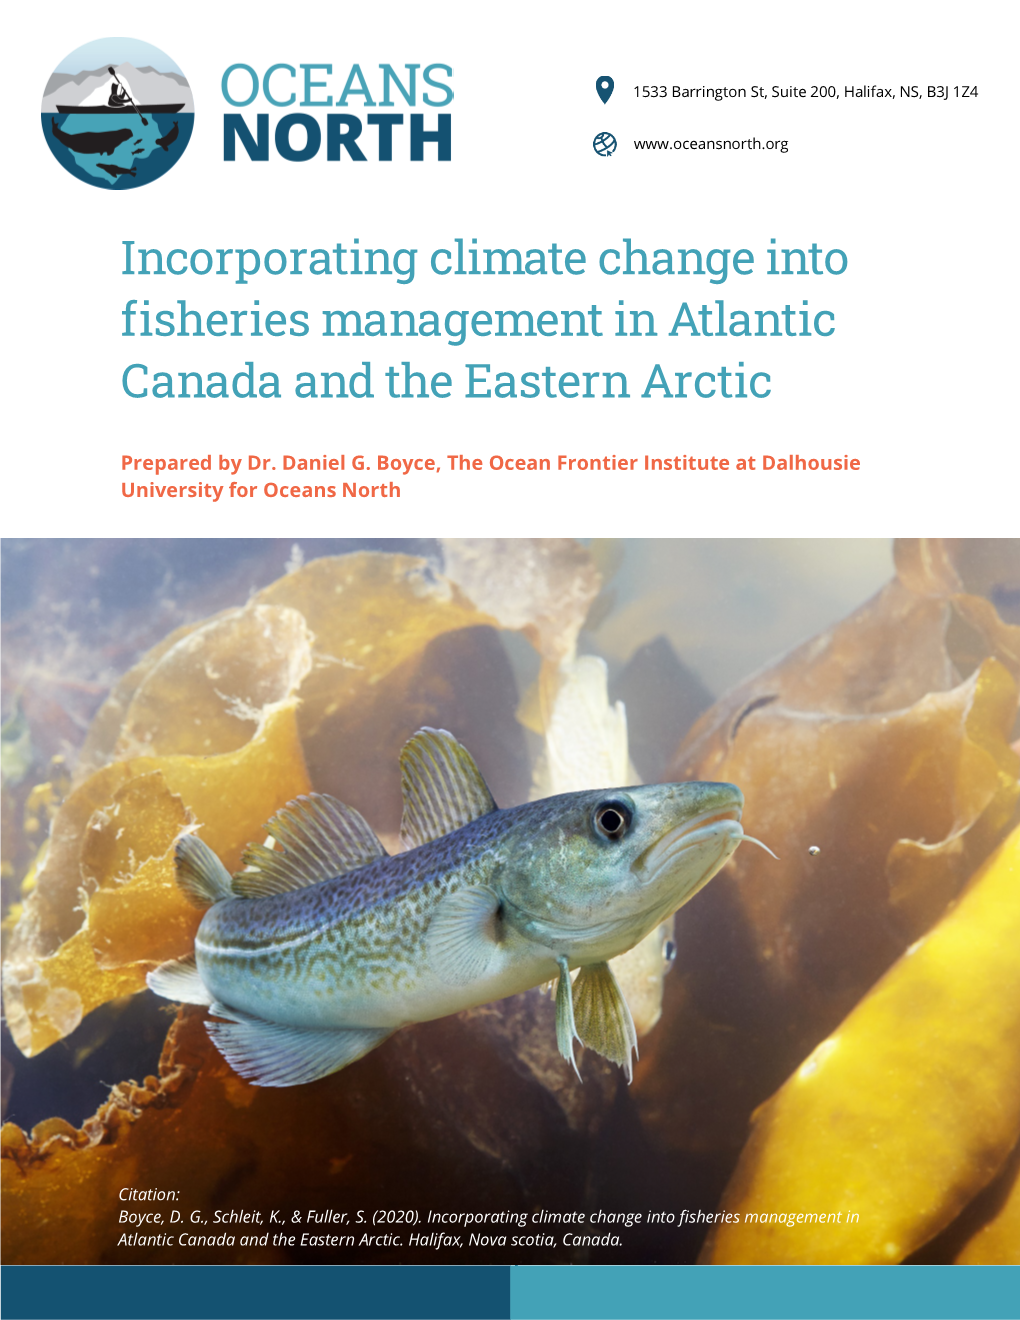 Incorporating Climate Change Into Fisheries Management in Atlantic Canada and the Eastern Arctic